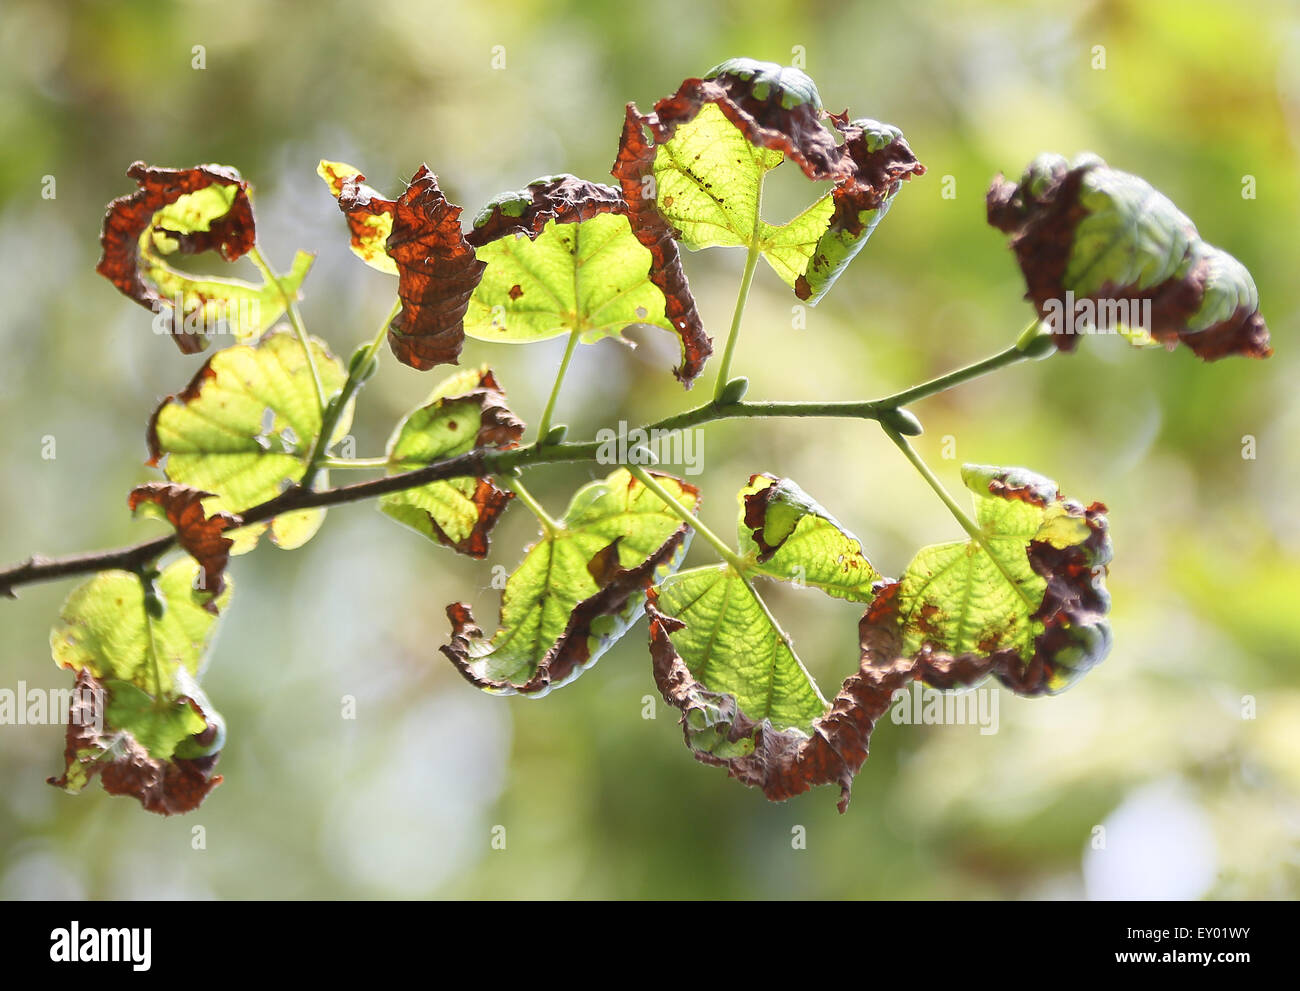 Berlin, Germany. 17th July, 2015. The leaves of a linden tree which has been damaged by weather in Schlosspark Glienicke in Berlin, Germany, 17 July 2015. During a press conference by the Technische Universitaet Berlin and the Stiftung Preussische Schloesser und Gaerten Berlin-Brandenburg, projects to ameliorate the threat to historic gardens from climate change were presented. Photo: Stephanie Pilick/dpa/Alamy Live News Stock Photo